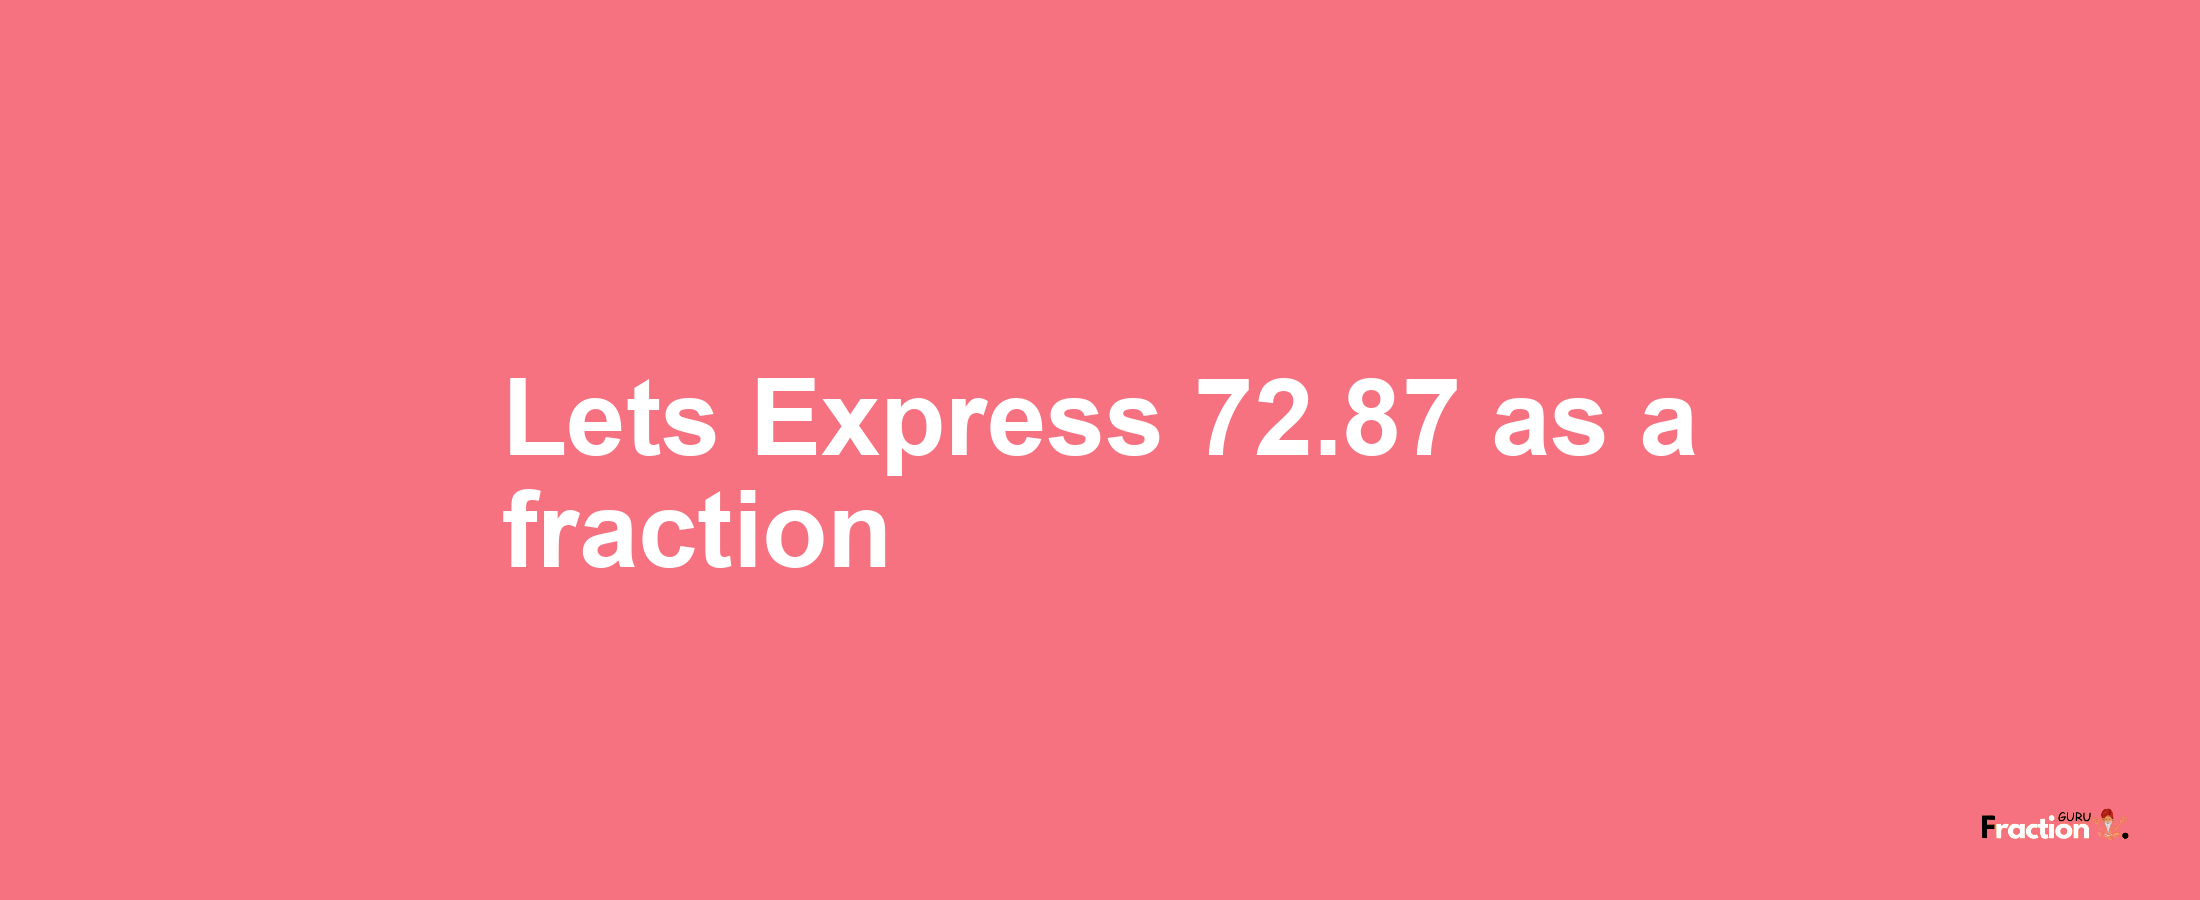 Lets Express 72.87 as afraction